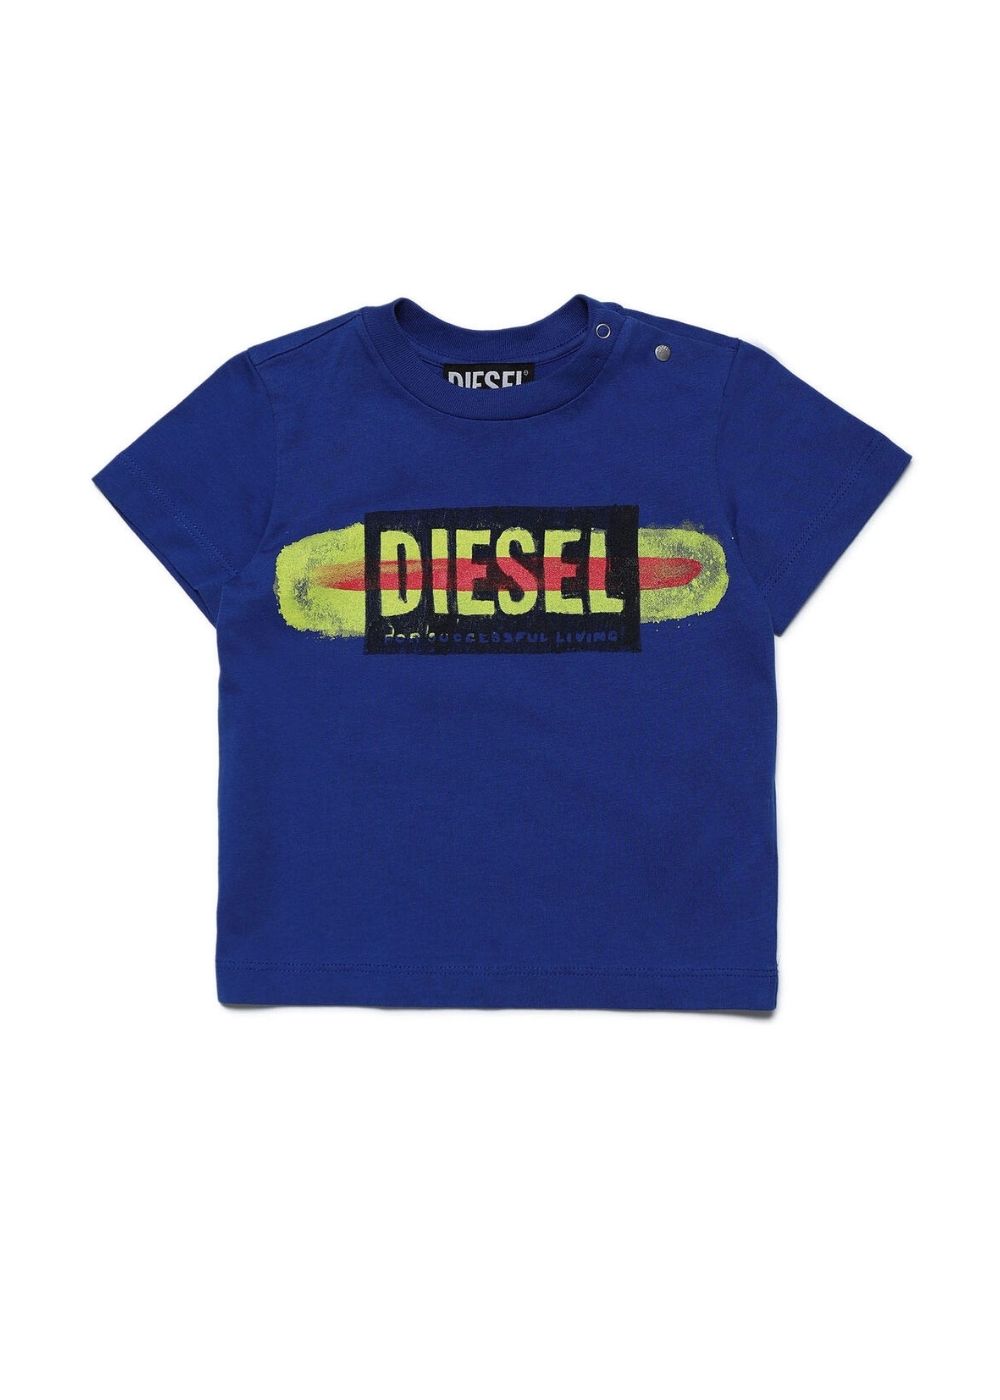 Featured image for “Diesel T-shirt effetto vernice”